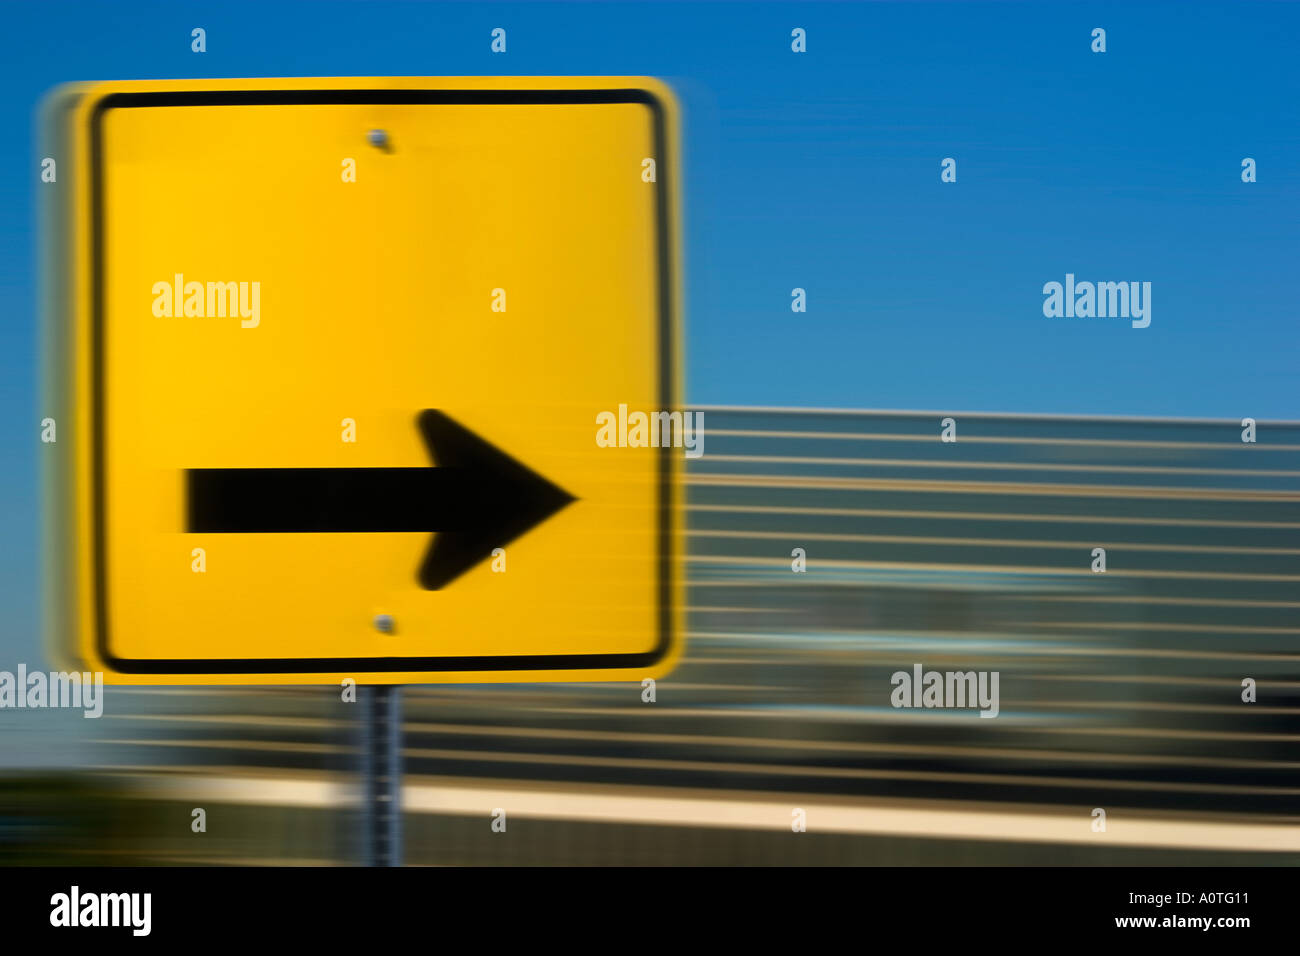 Yellow road sign with black directional arrow Stock Photo